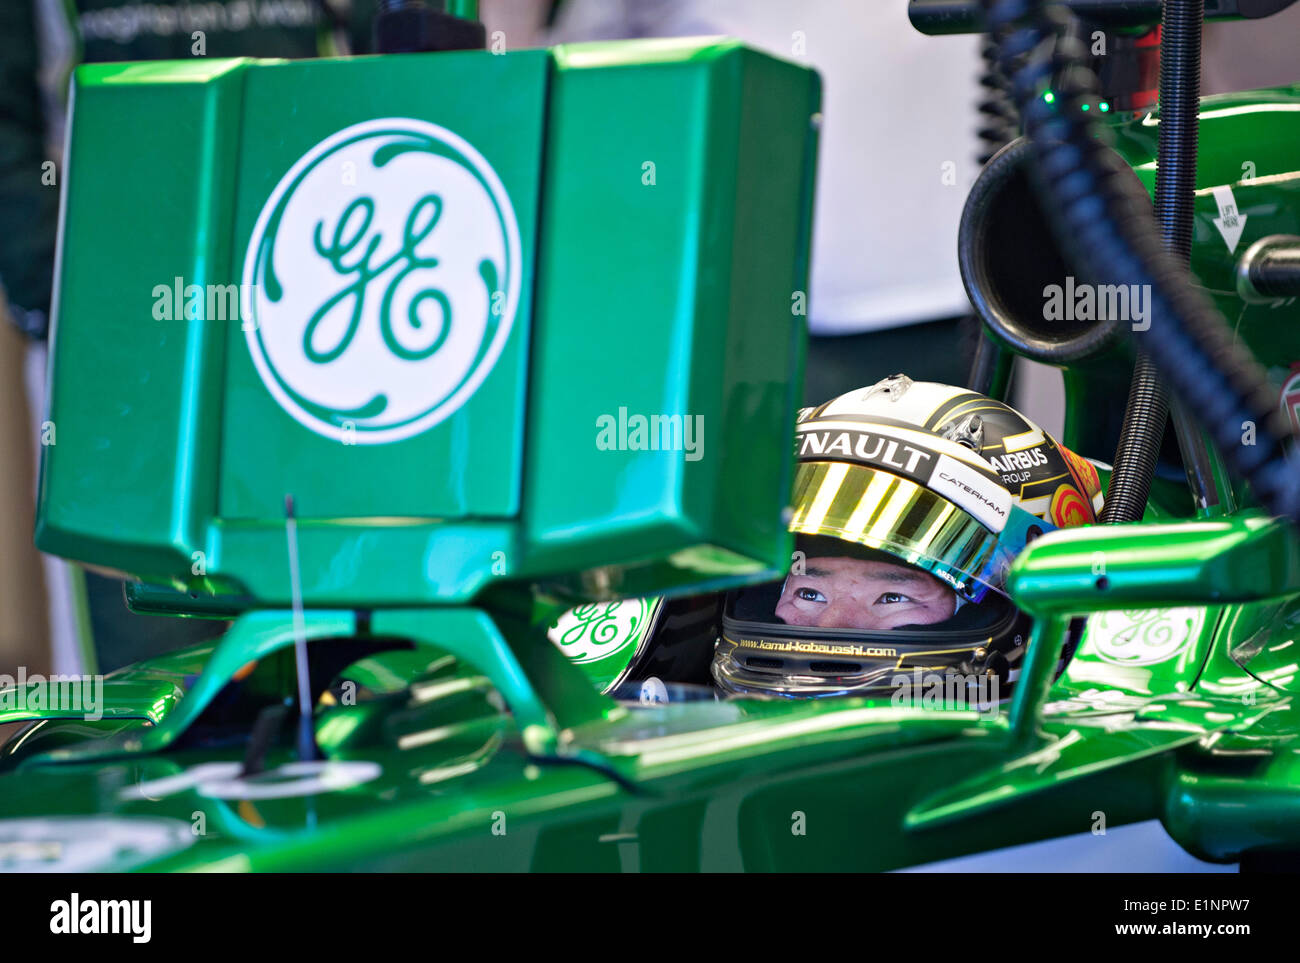 Montreal, Canada. 7th June, 2014. Caterham Formula One driver Kamui Kobayashi of Japan checks his status between laps in the pit lane during the qualifying session of 2014 Canadian Formula One Grand Prix at the Circuit Gilles Villeneuve in Montreal, Canada, on June 7, 2014. Credit:  Andrew Soong/Xinhua/Alamy Live News Stock Photo